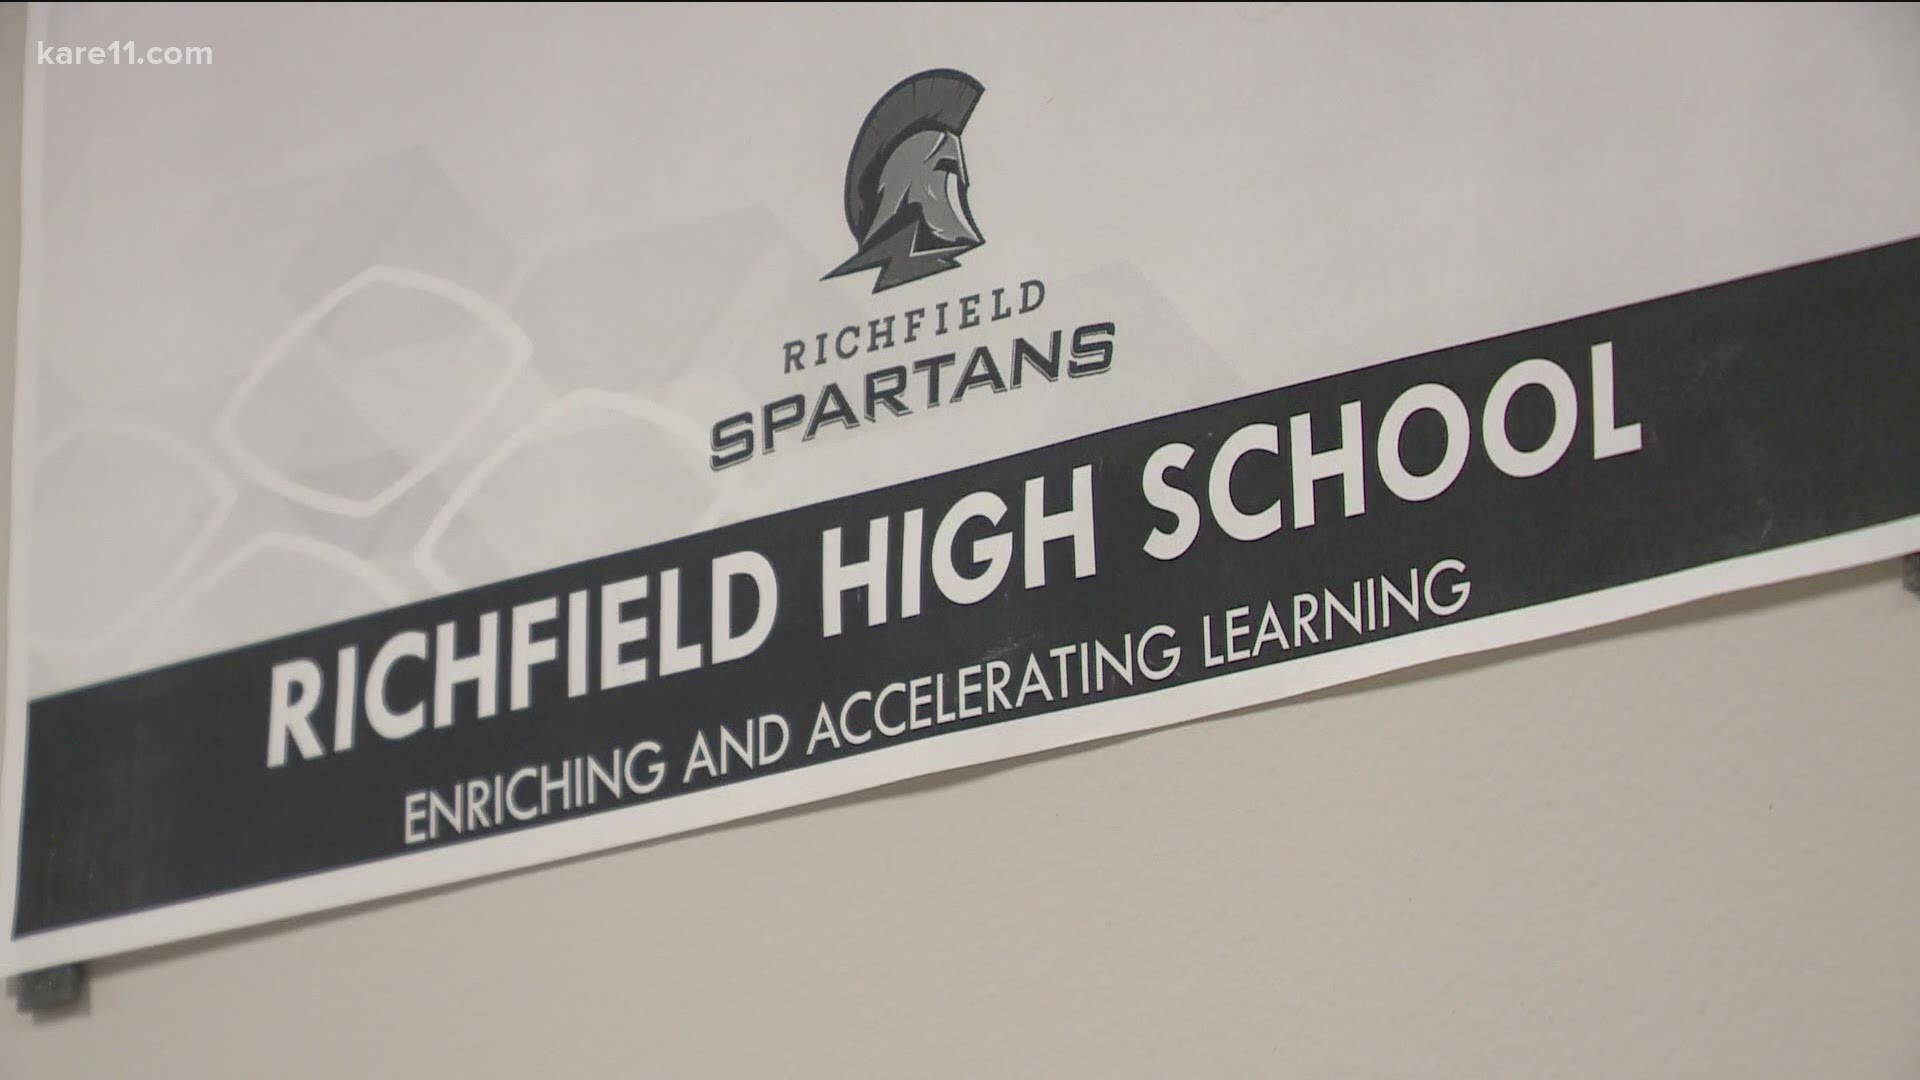 According to Richfield Public Schools, state data shows 89.71% of white students graduated in four years, and 89.62% of non-white students graduated in four years.